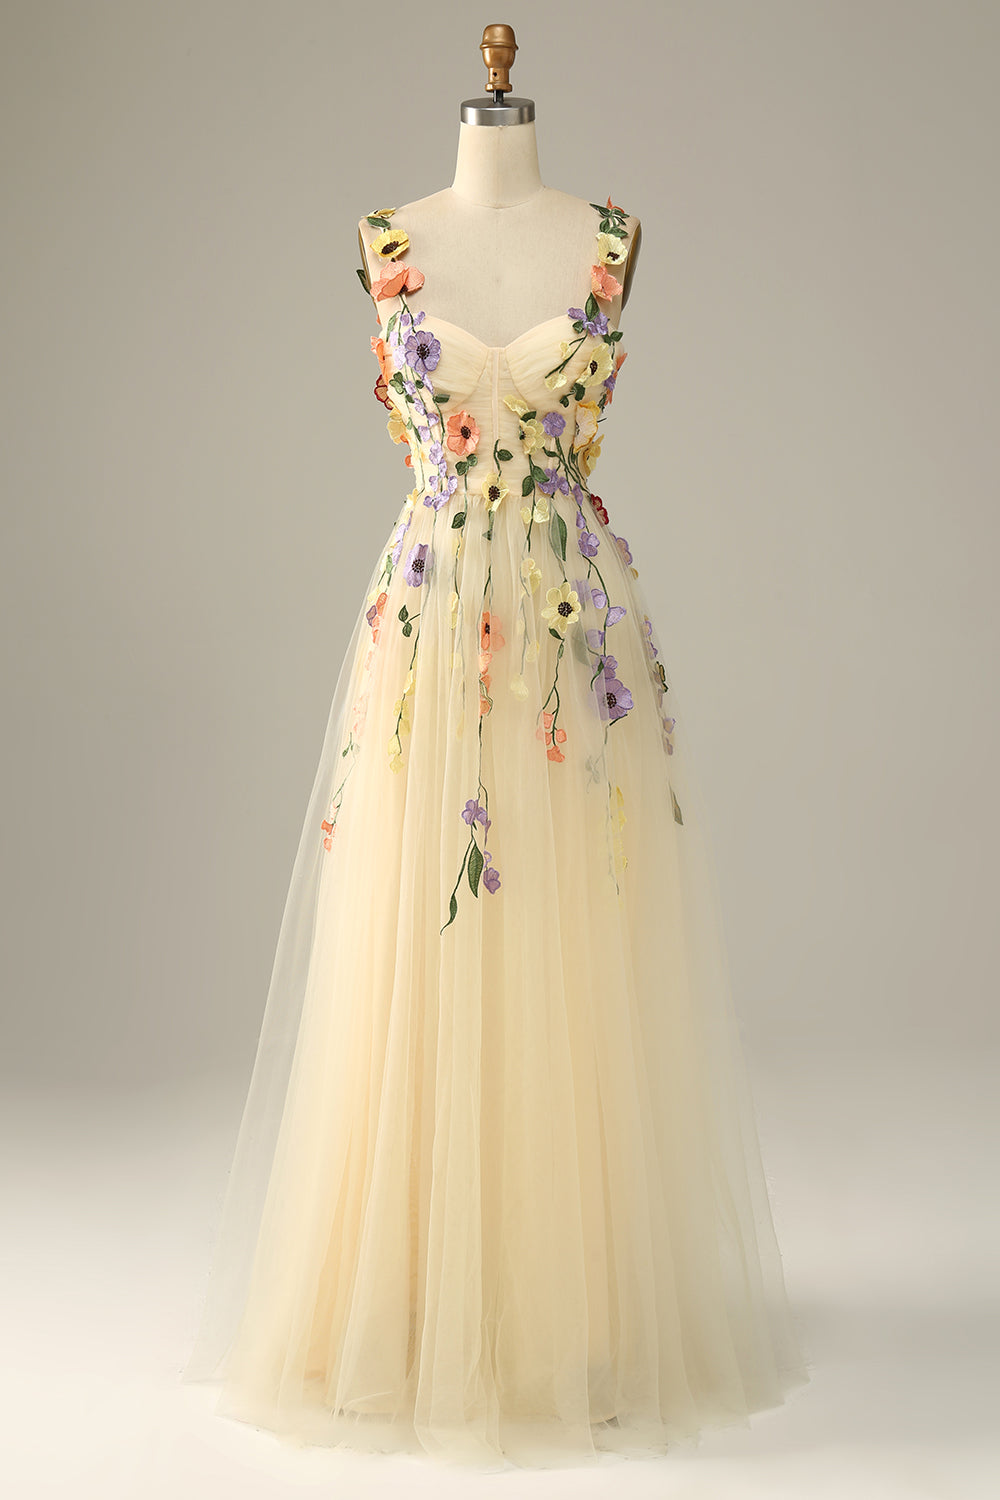 Rustic Wedding Dress, Champagne Spaghetti Straps Prom Dress With 3D Flowers